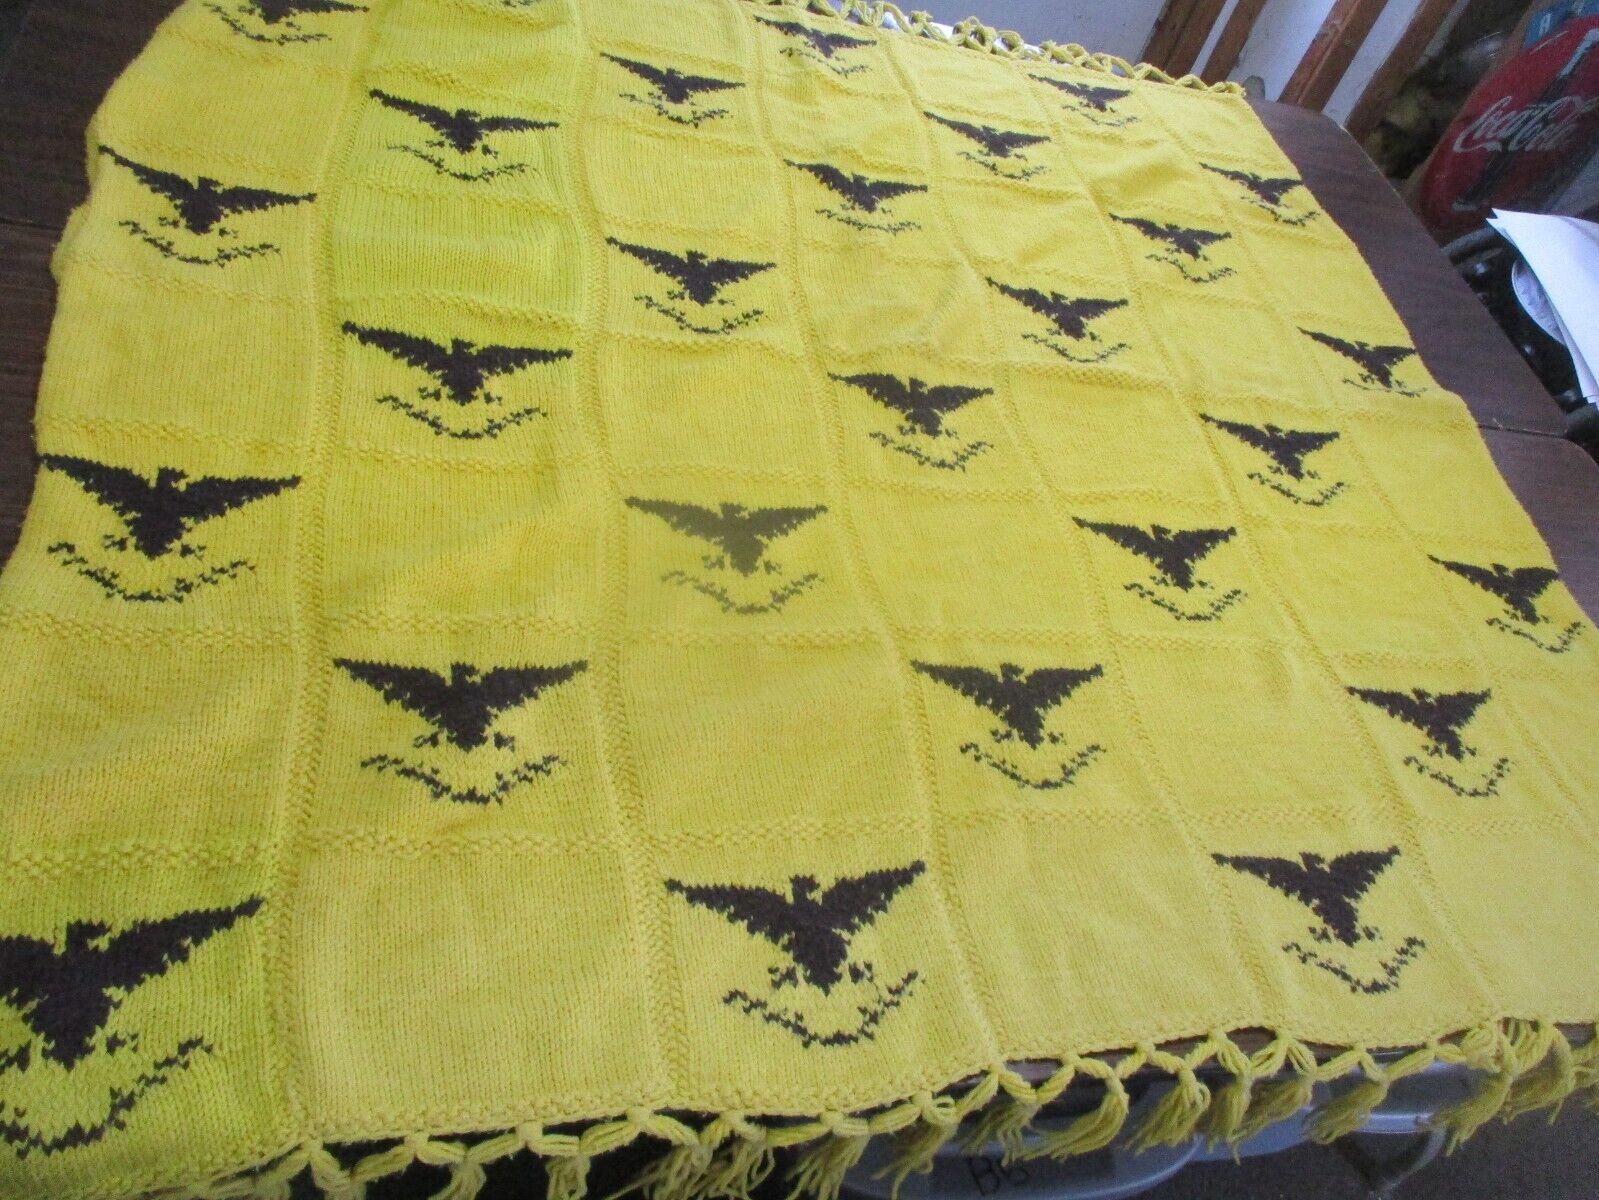 Vintage Yellow Blanket with Eagles 1950-1975